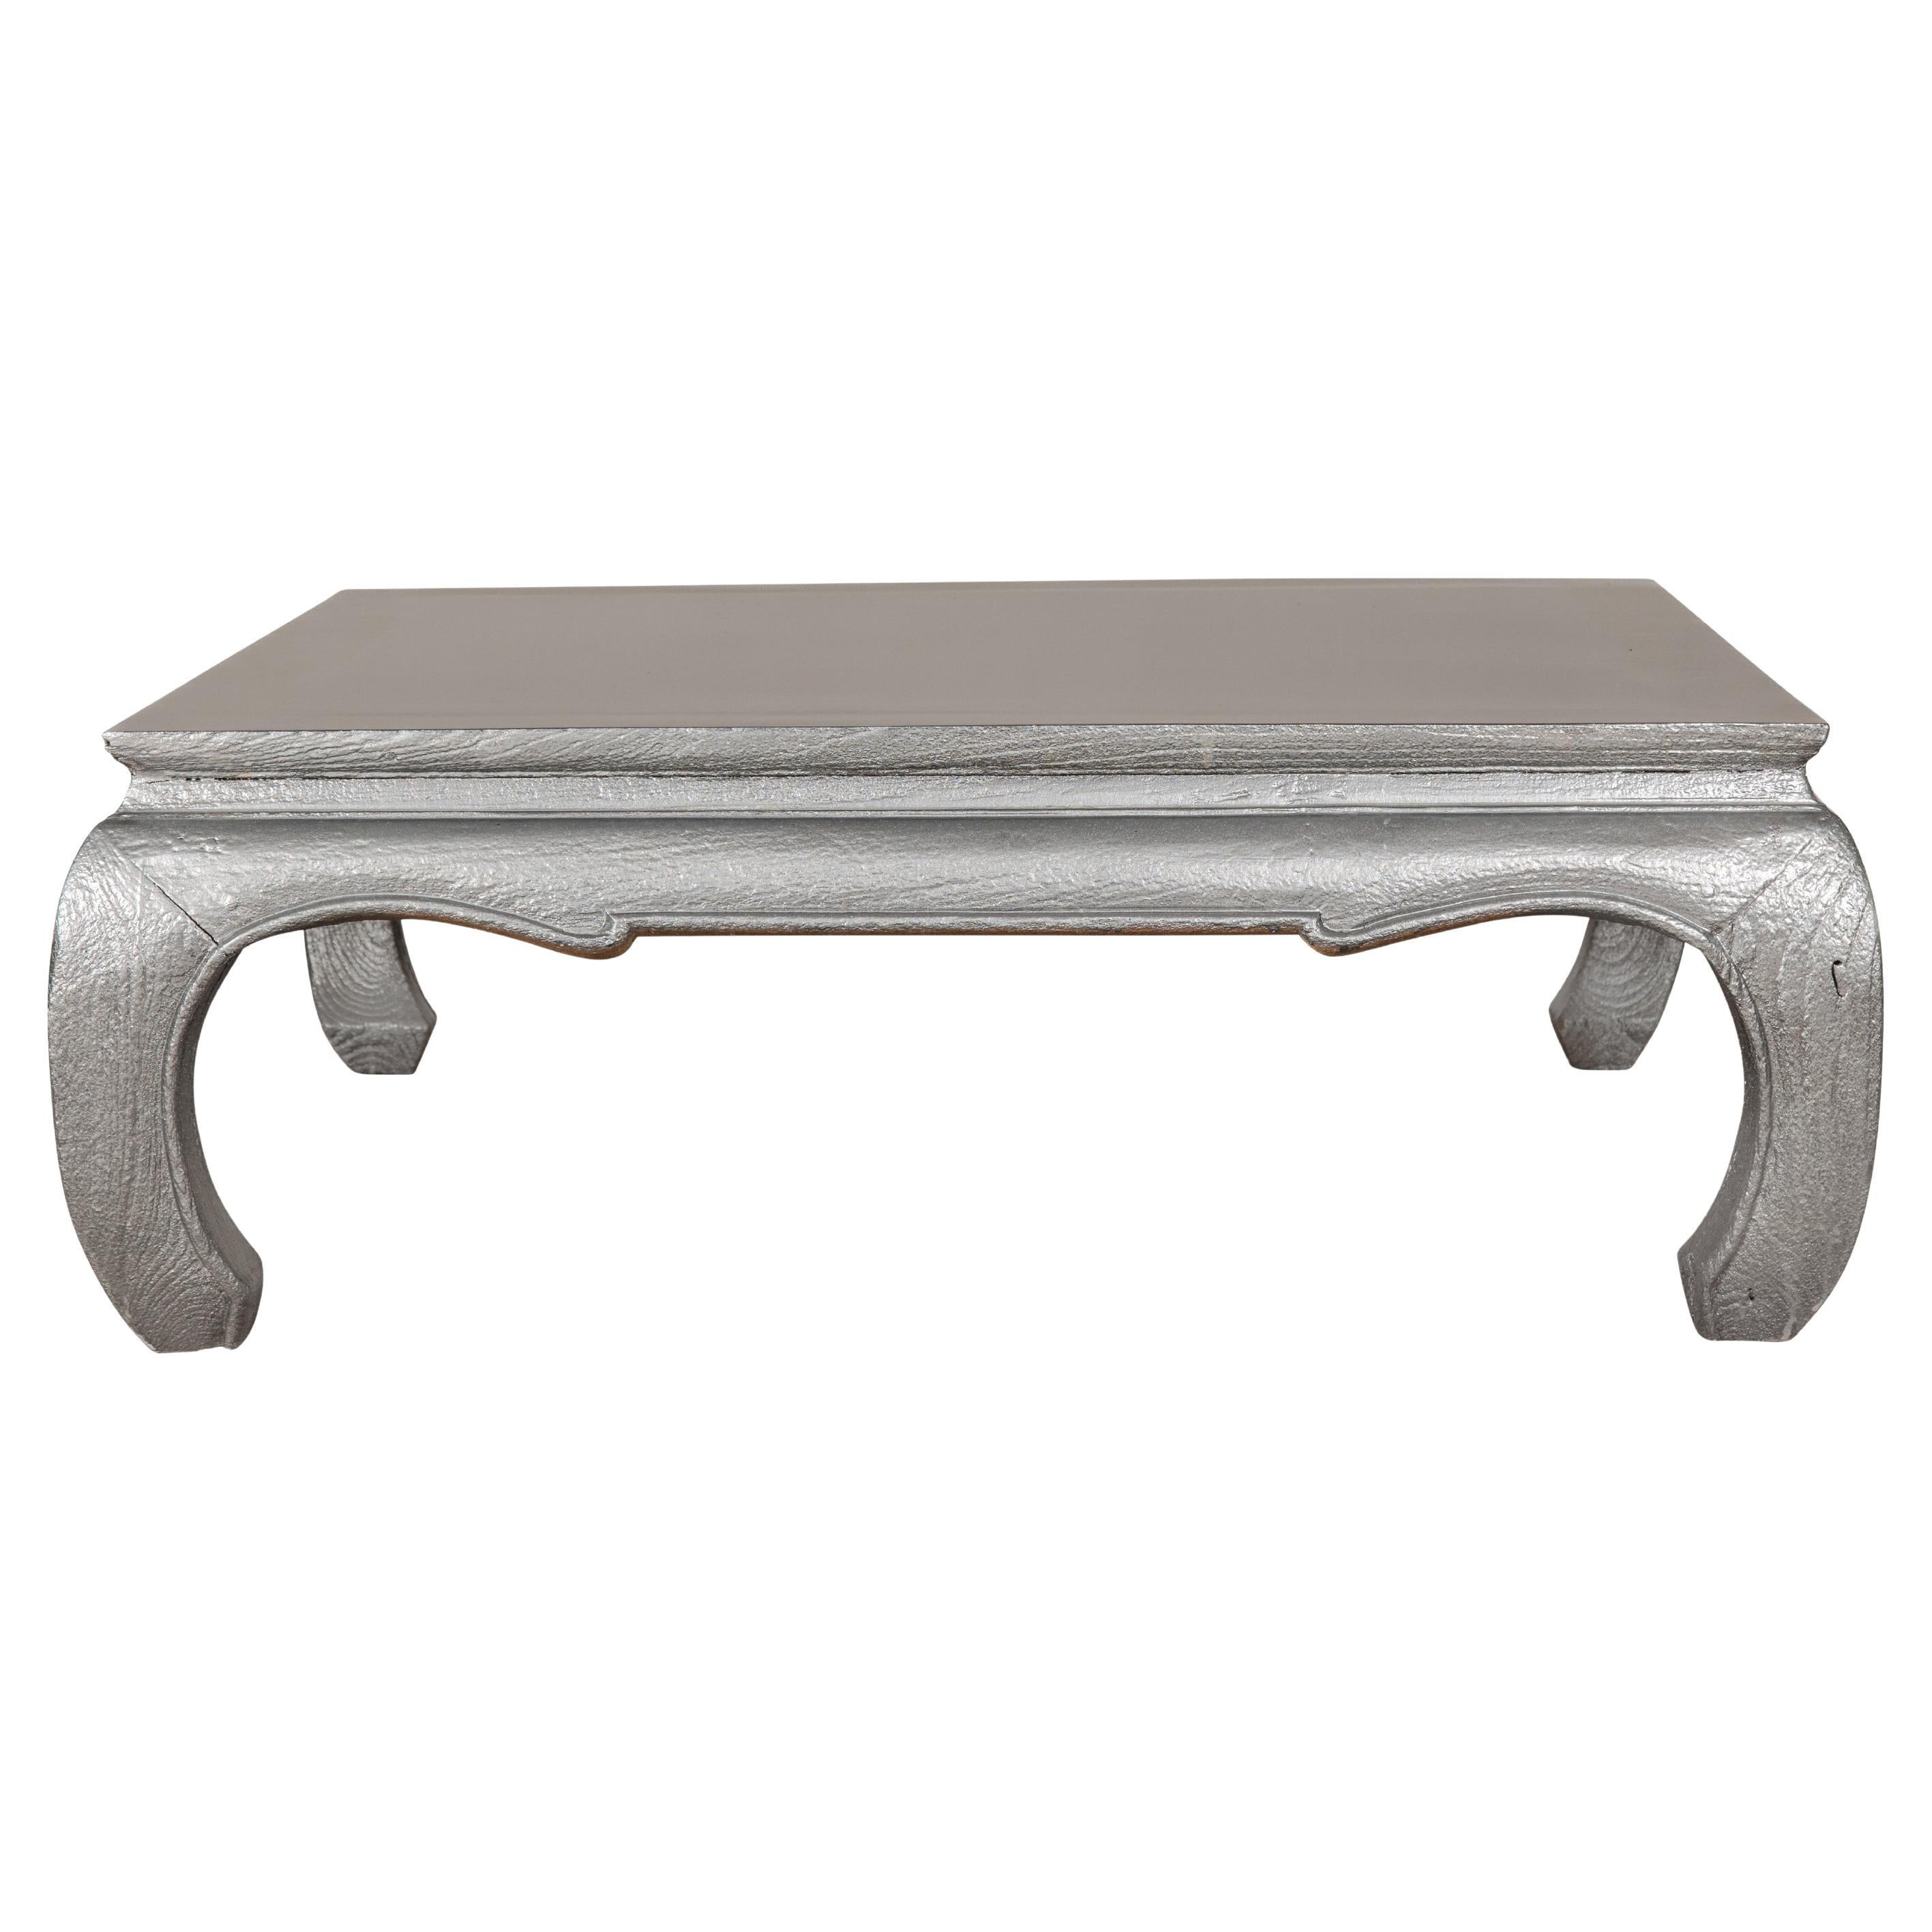 Teak Coffee Table with Custom Silver Patina, Chow Legs and Carved Apron For Sale